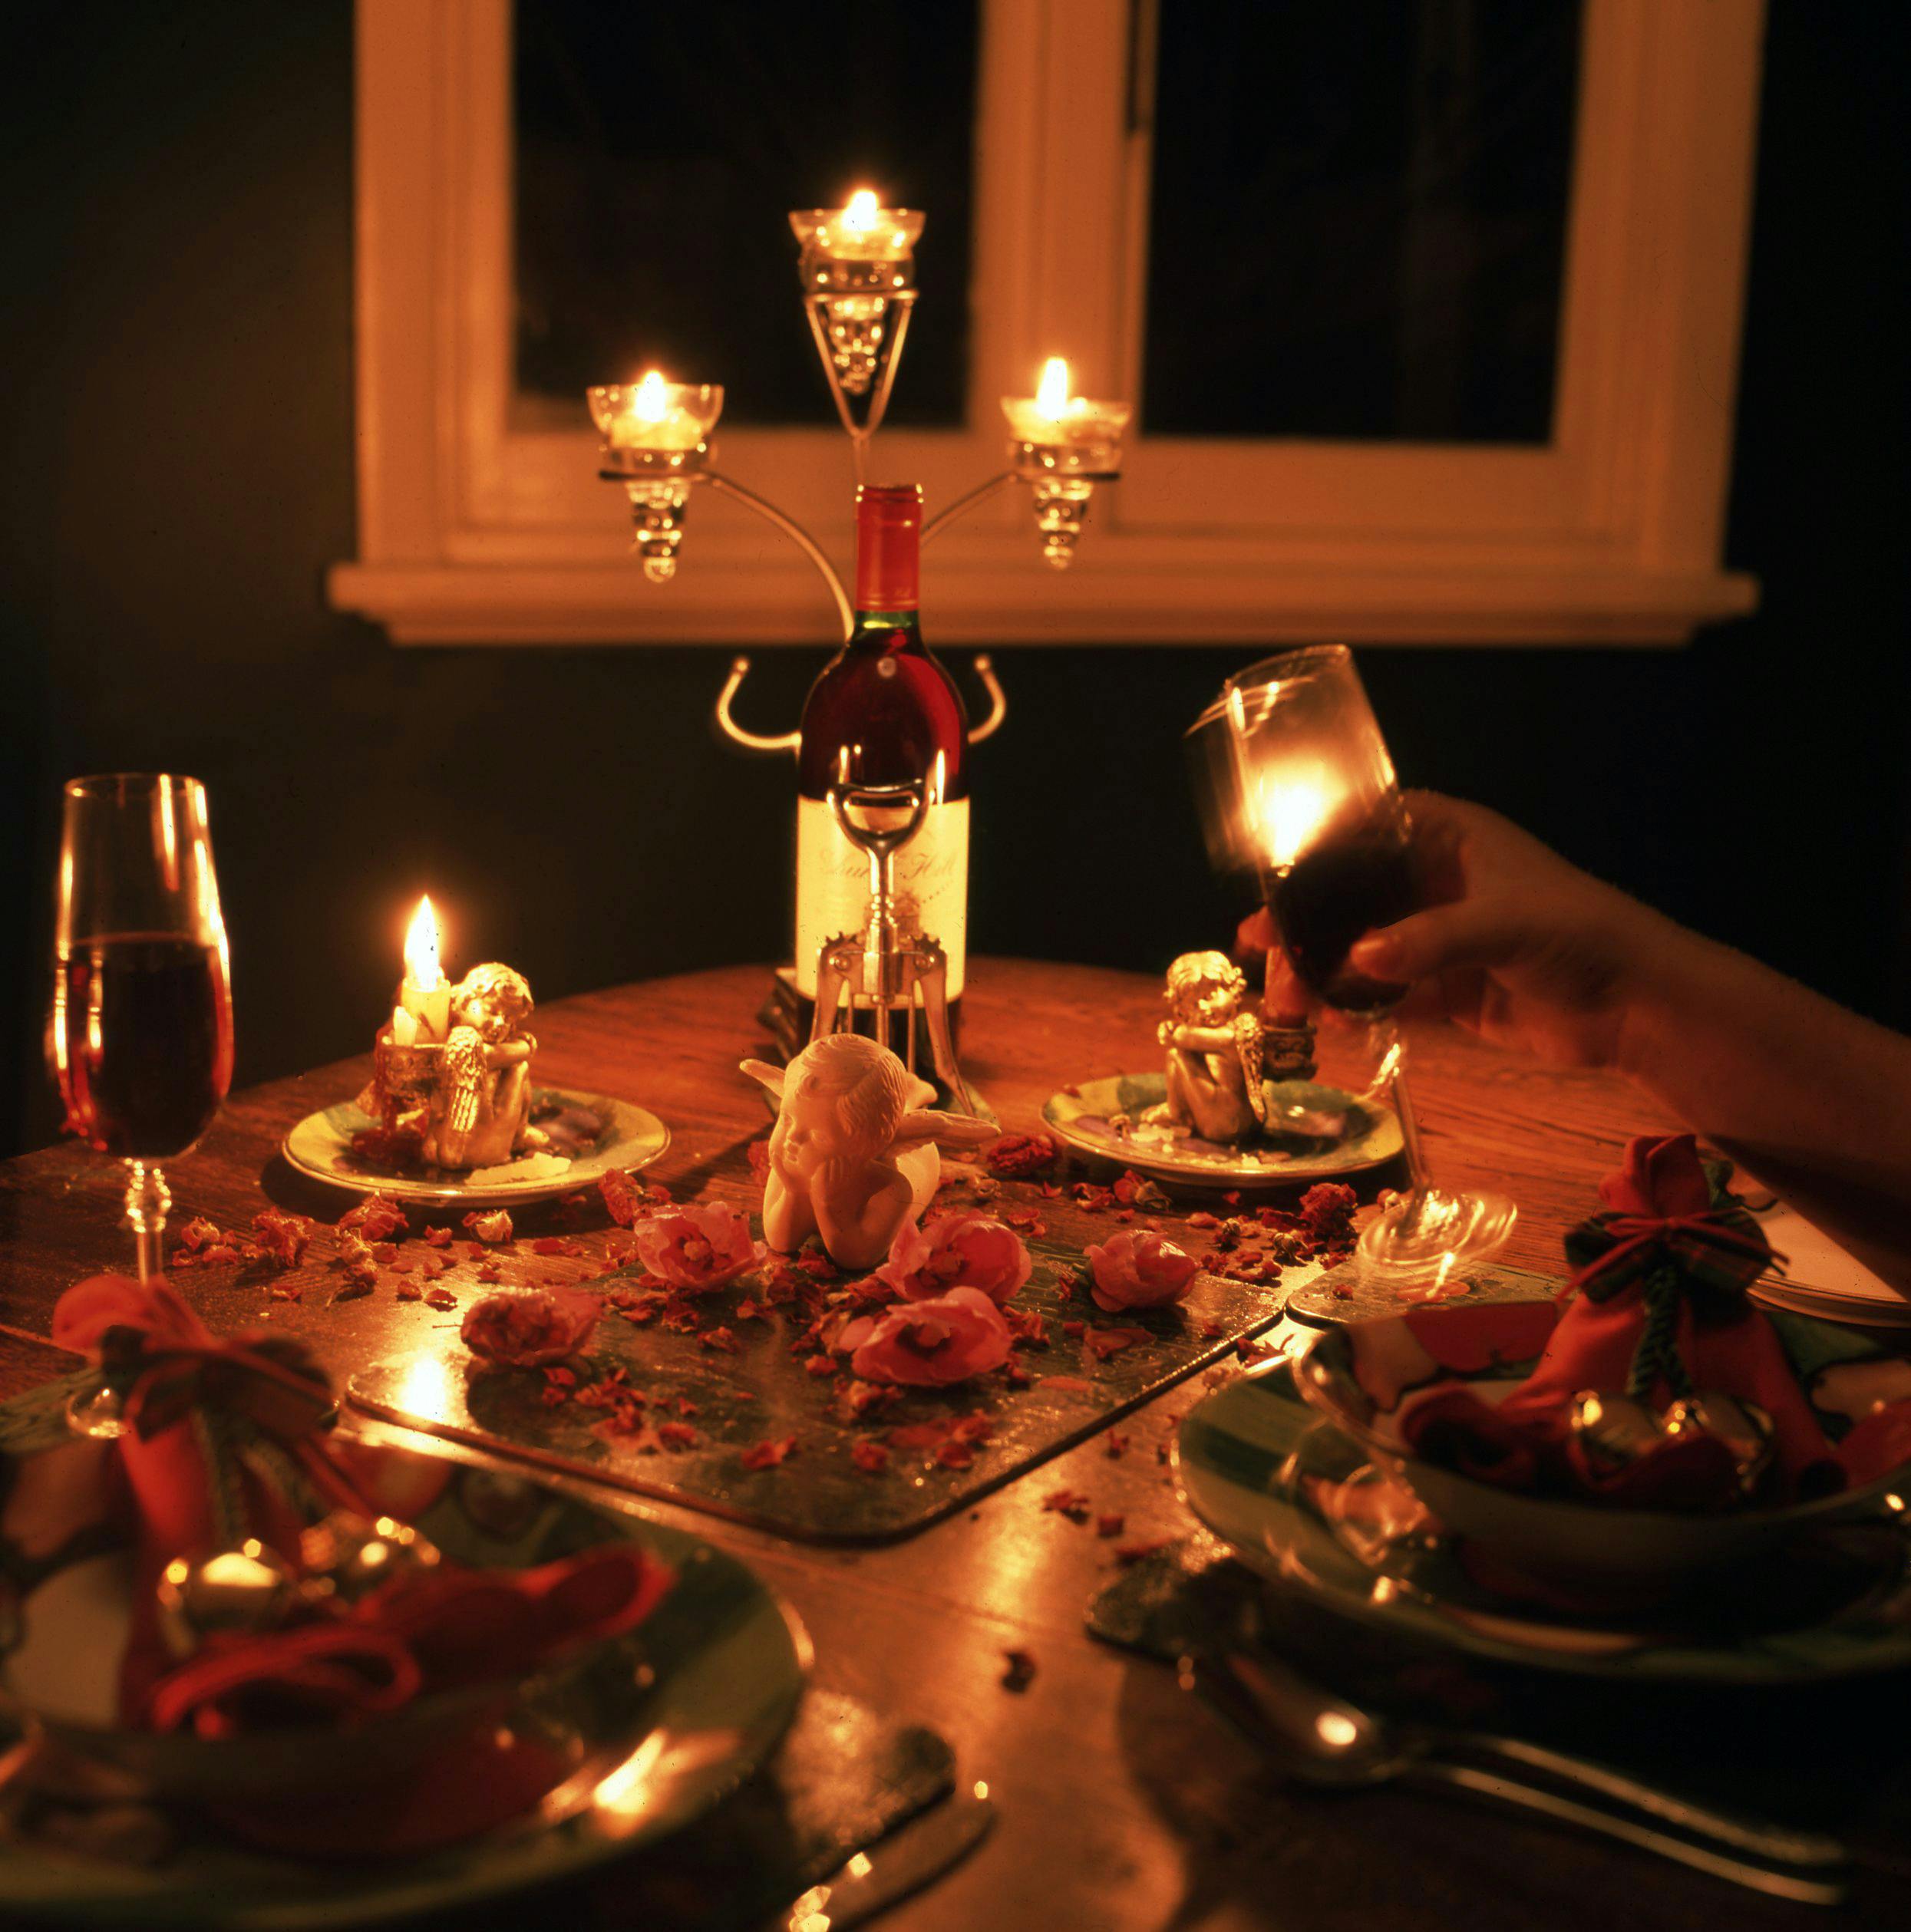 Free stock photo of candlelight, dinner table, glass of wine